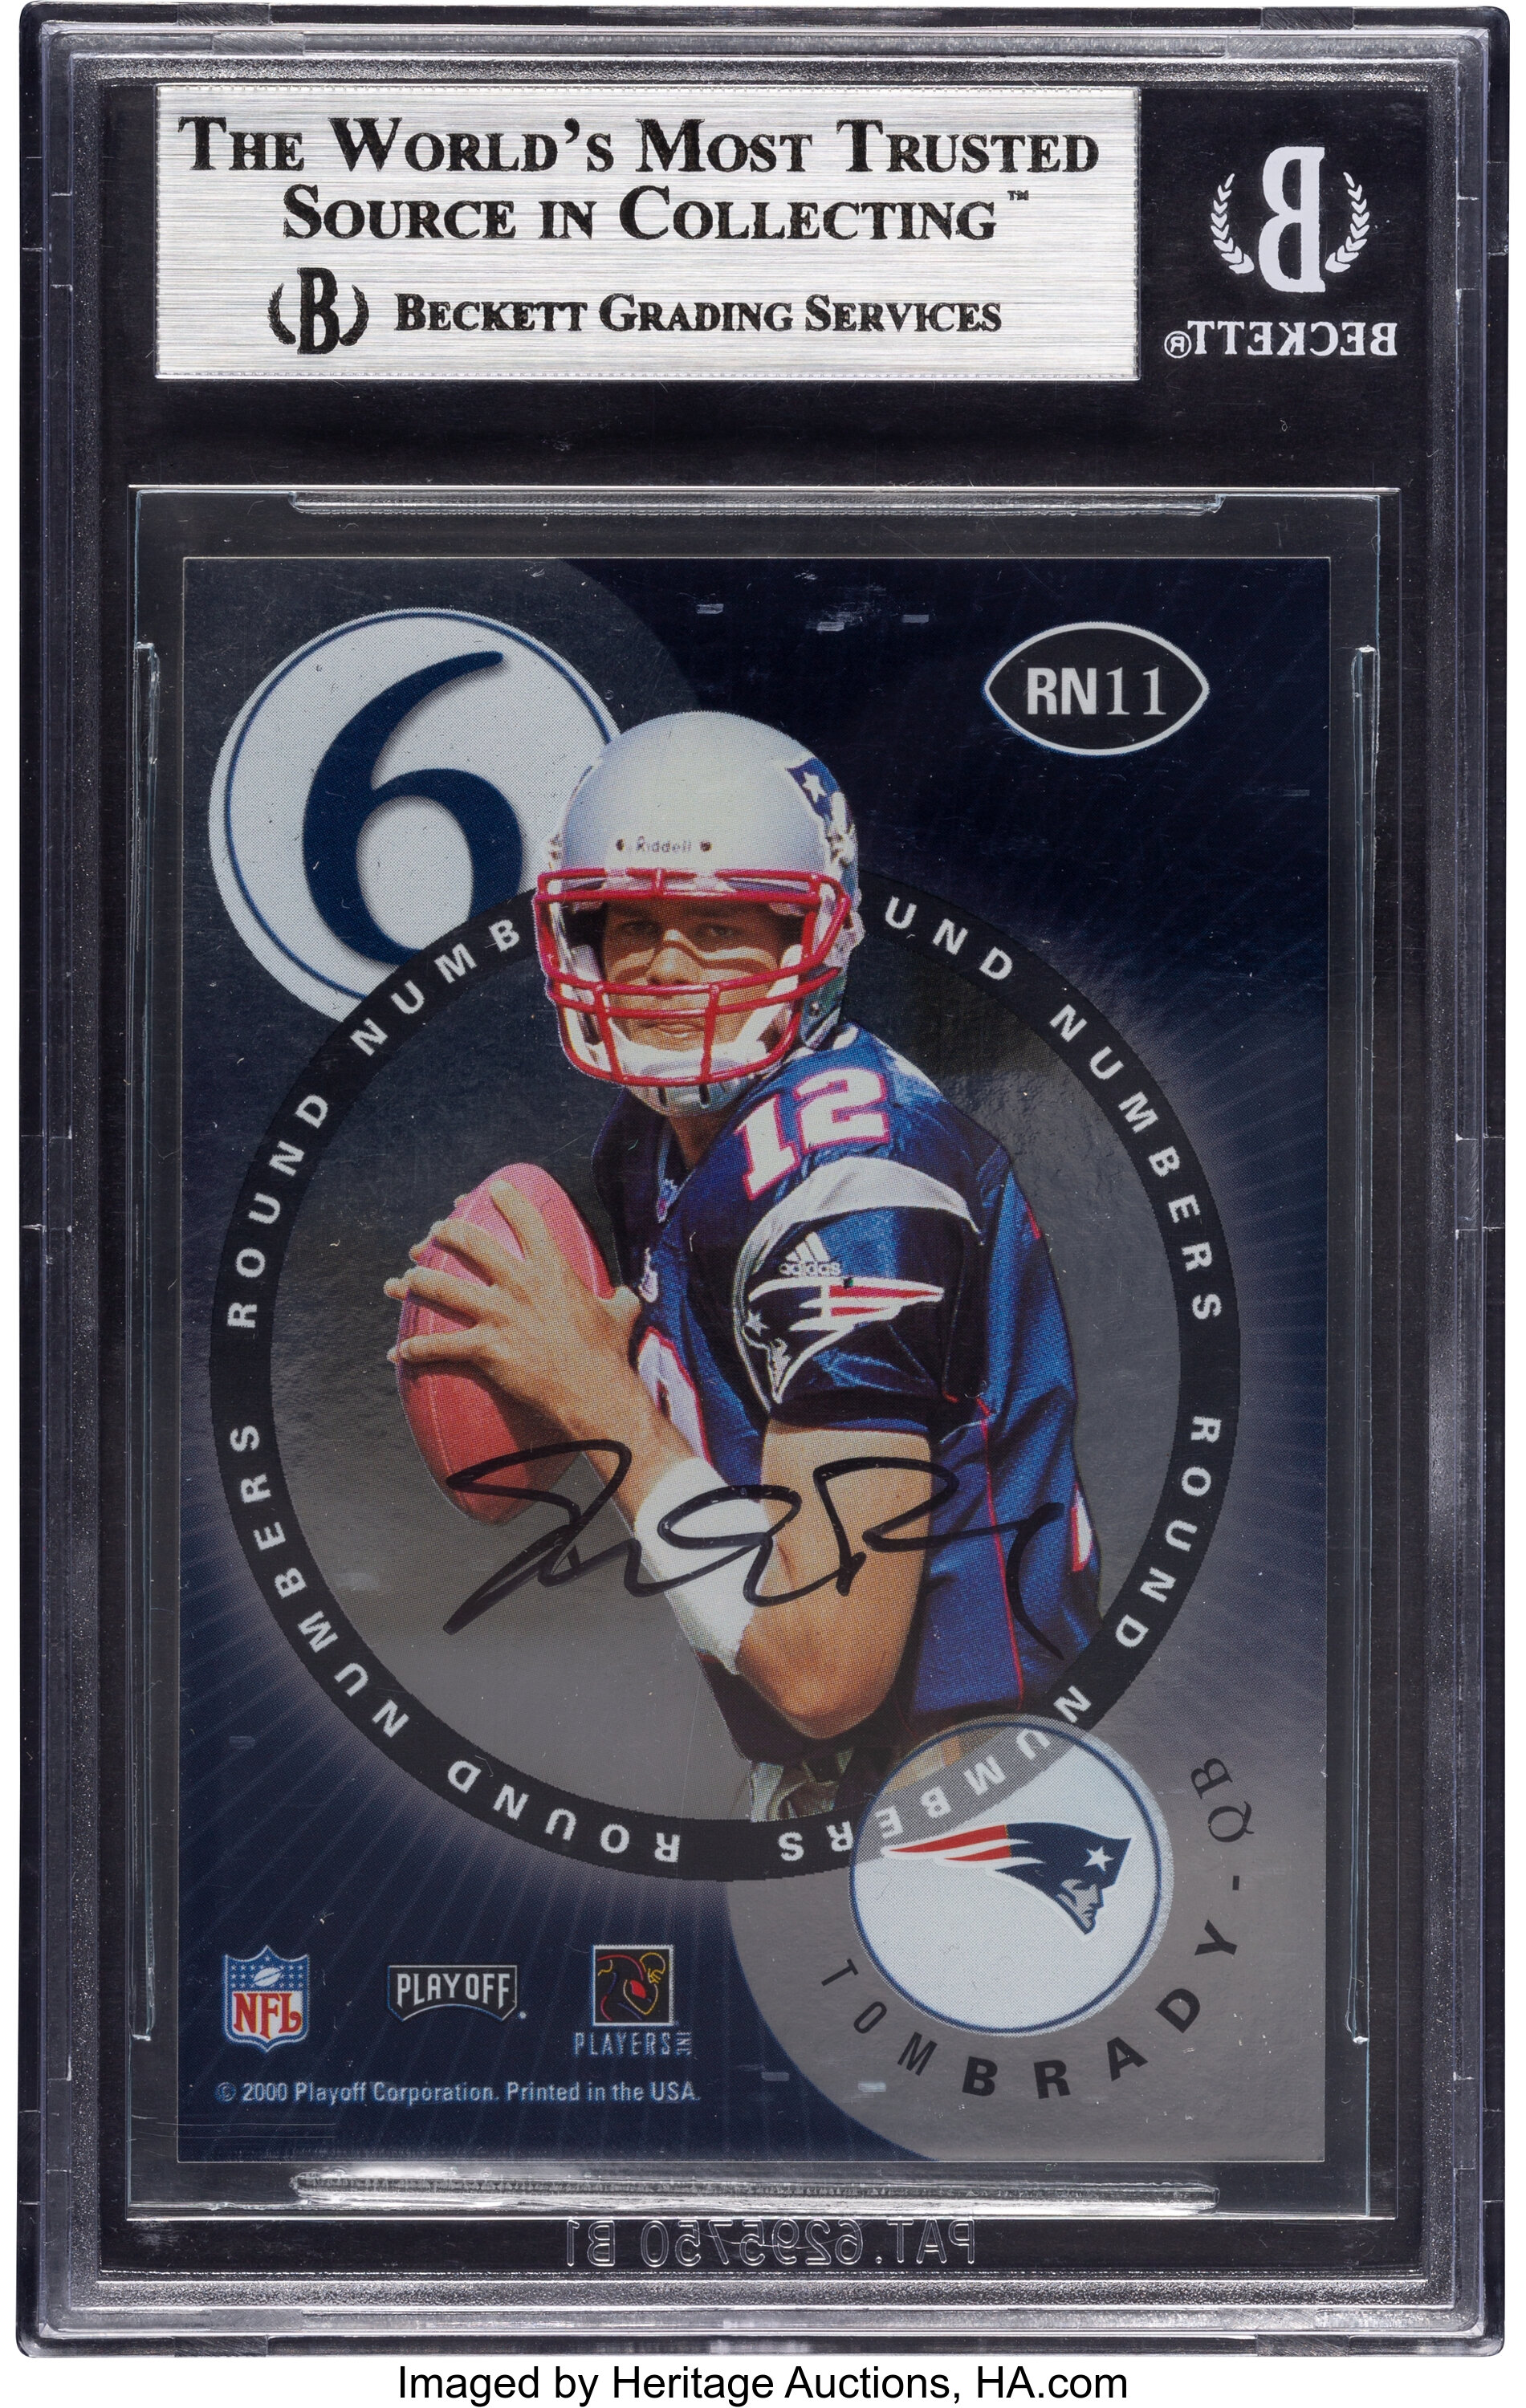 Tom Brady Autographed 2000 Pacific Revolution First Look Super